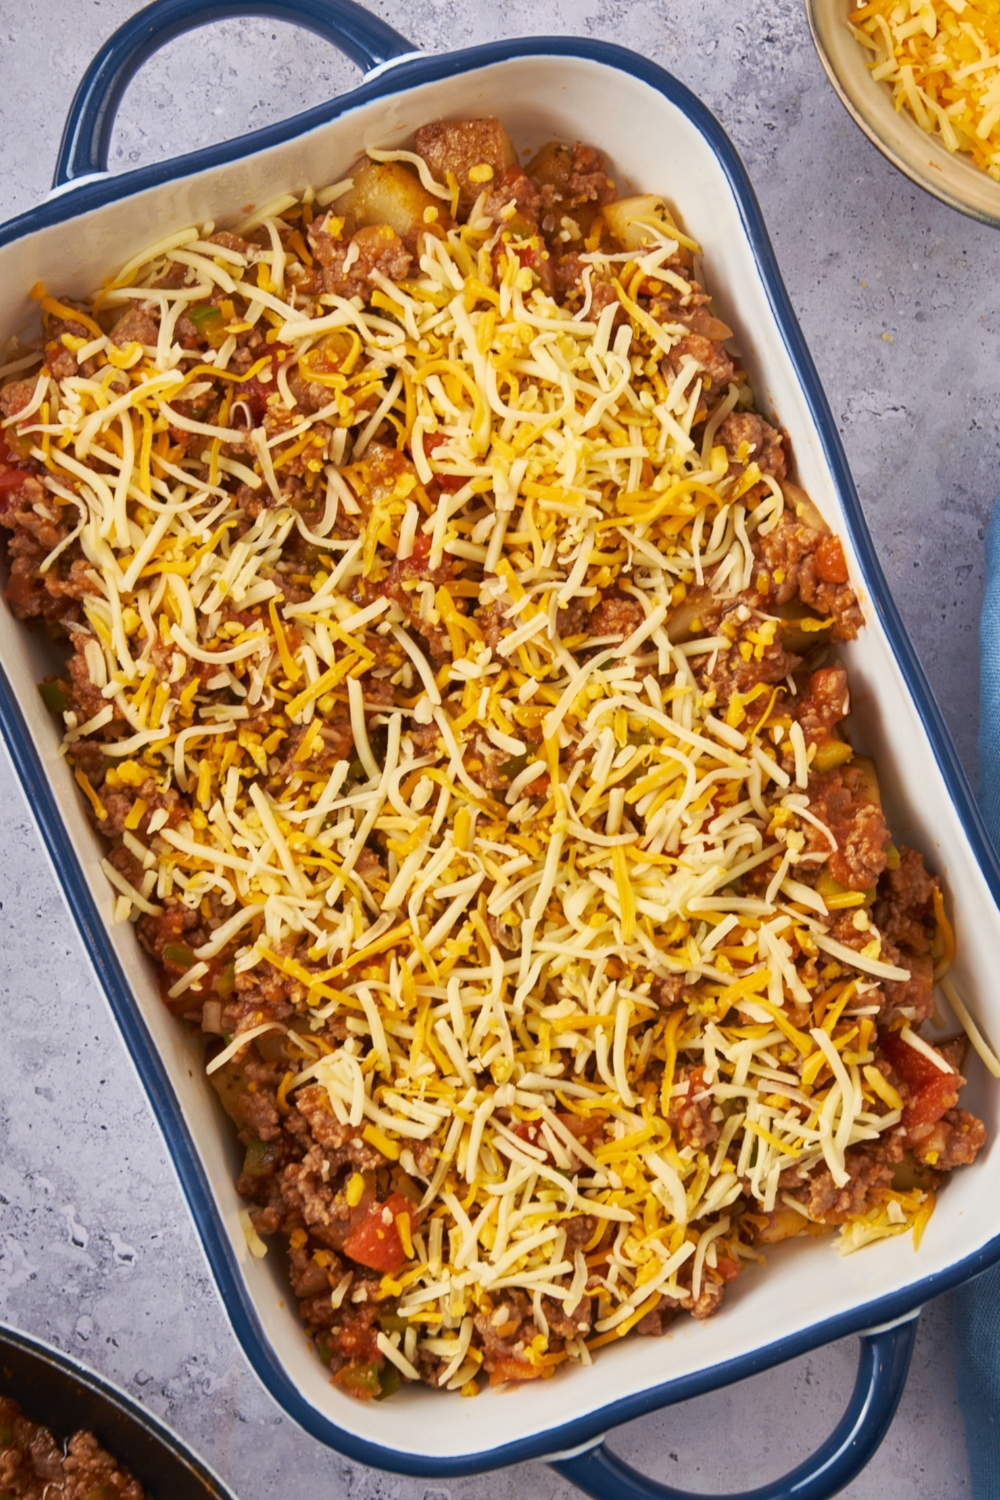 A casserole dish with a layer of potatoes and ground beef mixture topped with shredded cheese.